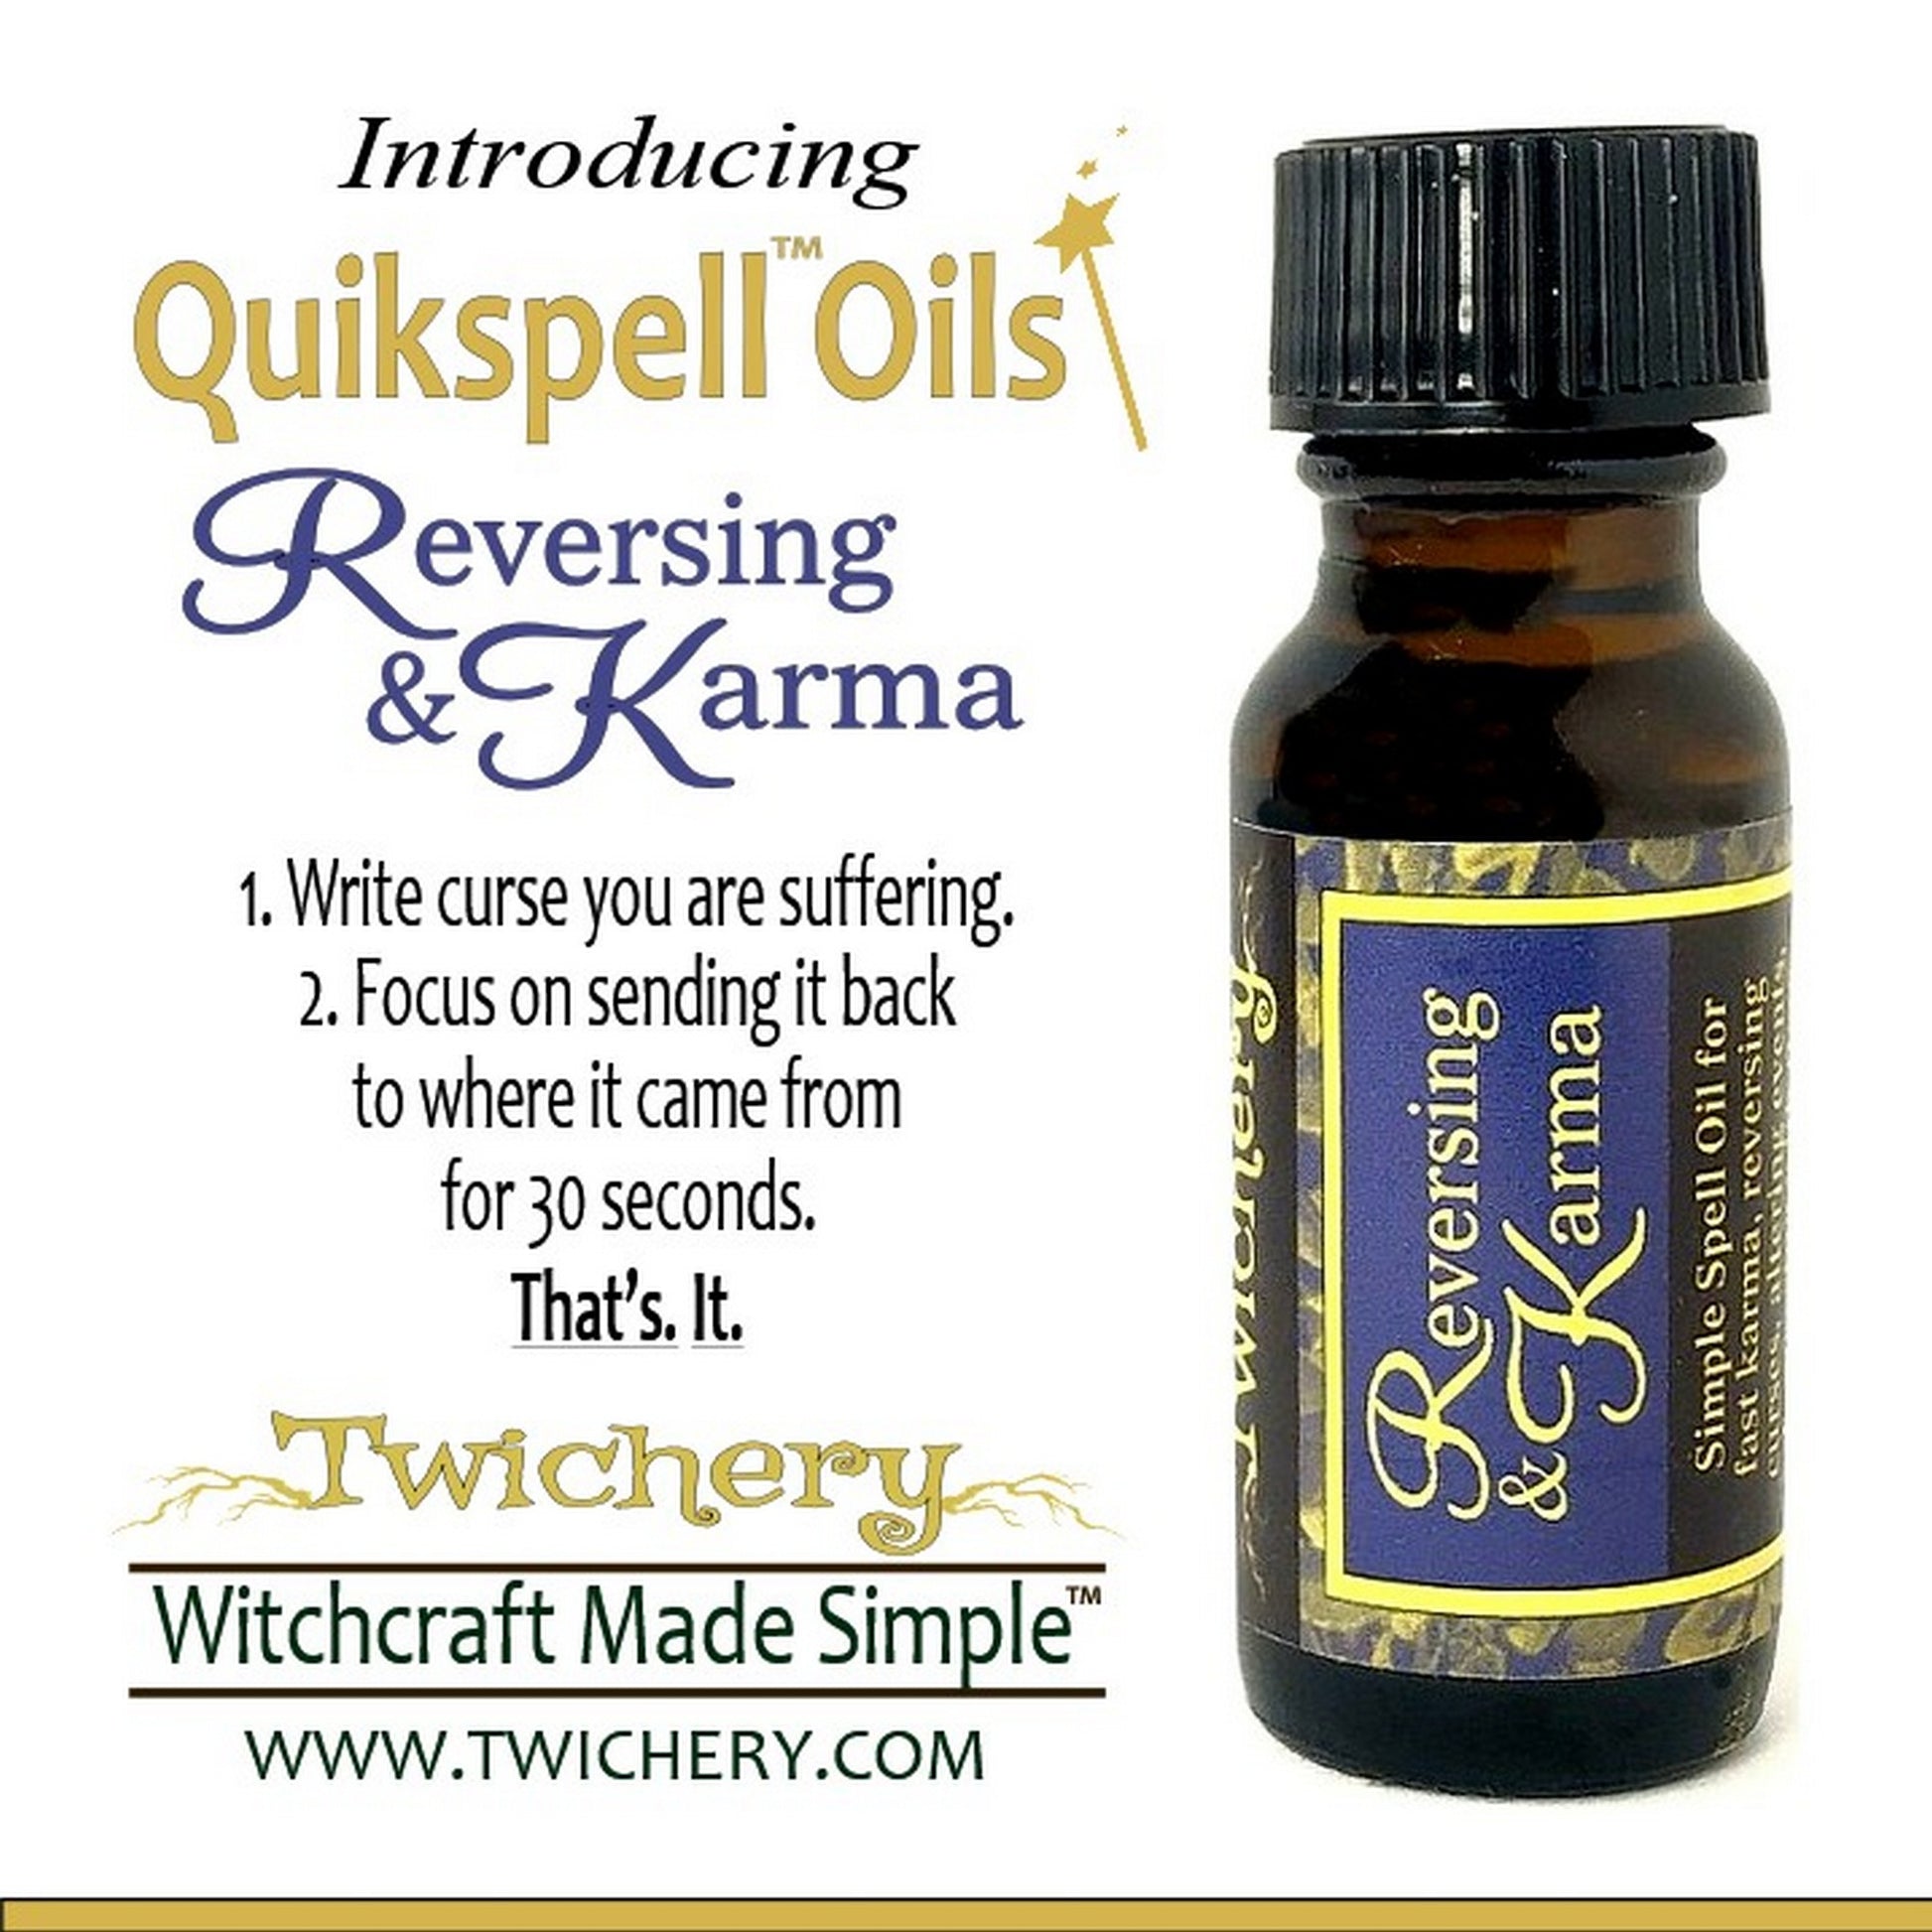 Twichery is Witchcraft Made Simple! Twichery Quikspell Reversing & Karma Oil is also known as Return to Sender Oil. Hoodoo, voodoo, wicca, pagan.